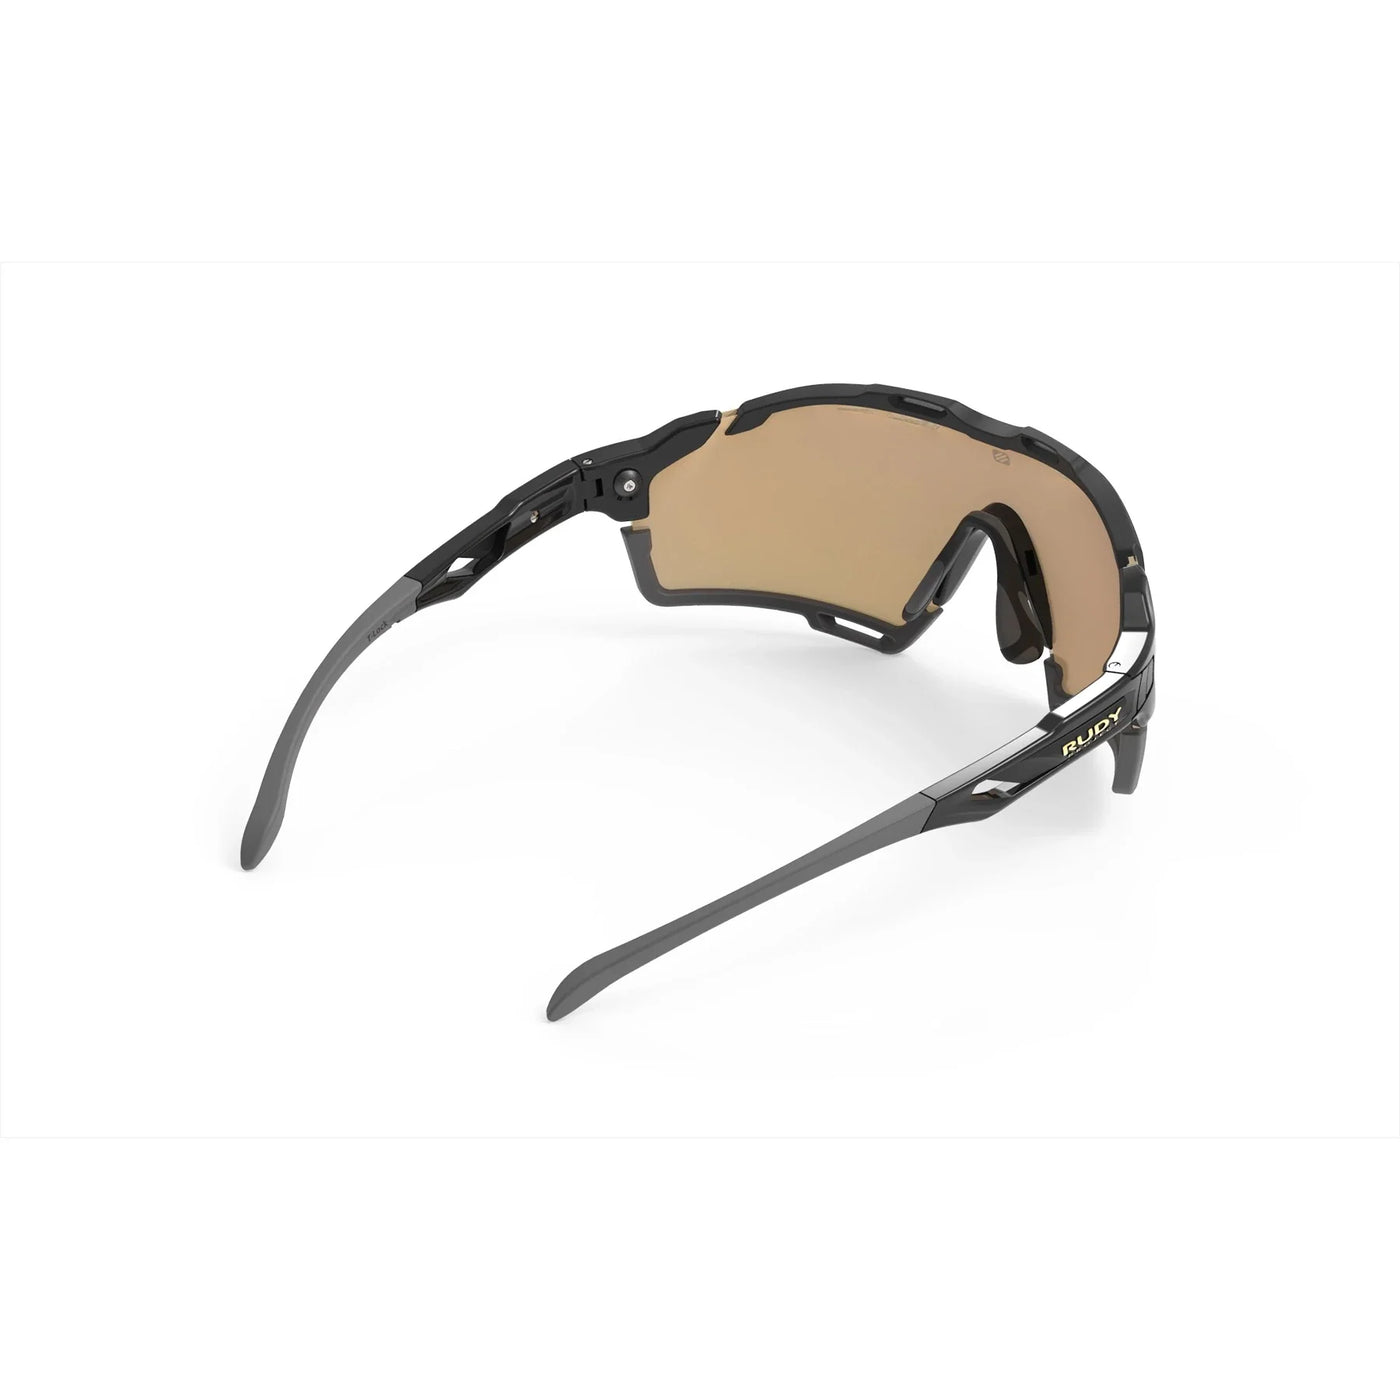 Rudy Project cycling sunglasses#color_cutline-black-gloss-frame-with-multilaser-gold-lenses-grey-bumpers